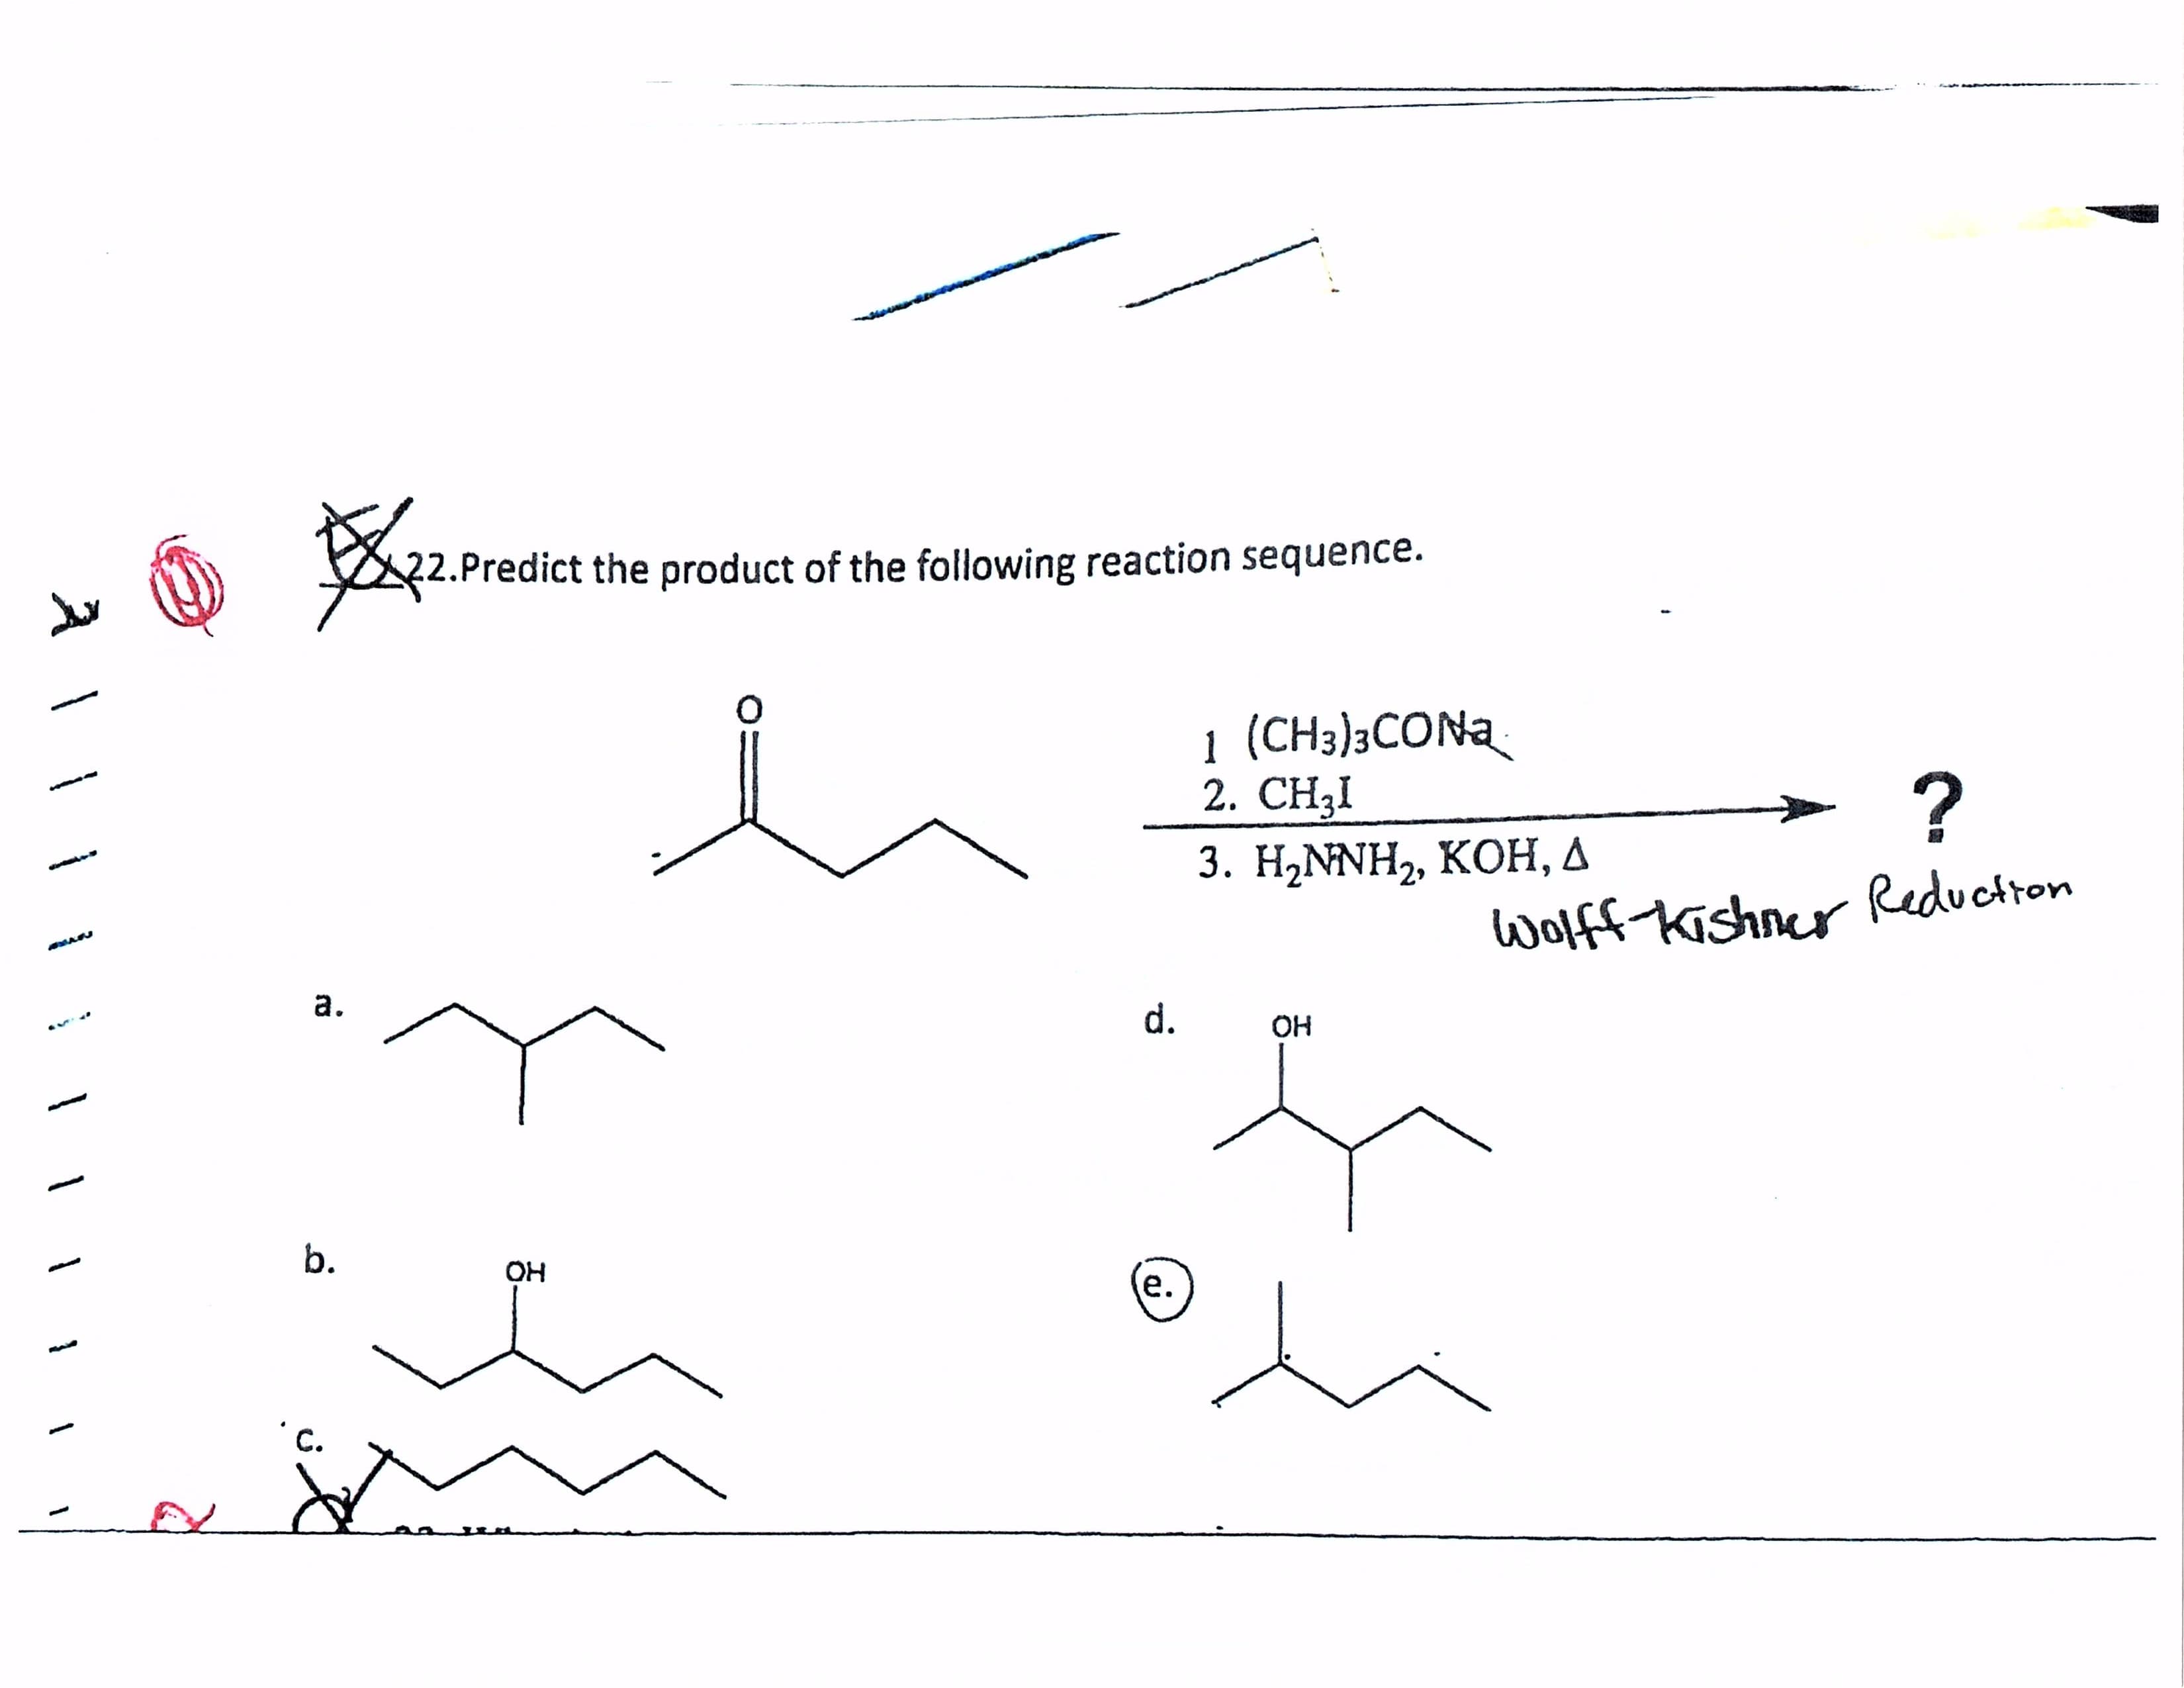 .Predict the product of the following reaction sequence.
1
1 (CH3)3CONA
2. CH3I
3. Н-MNH>, КОН, Д
Wolff Kishner Reduction
a.
d.
OH
b.
OH
е.
'
C.
